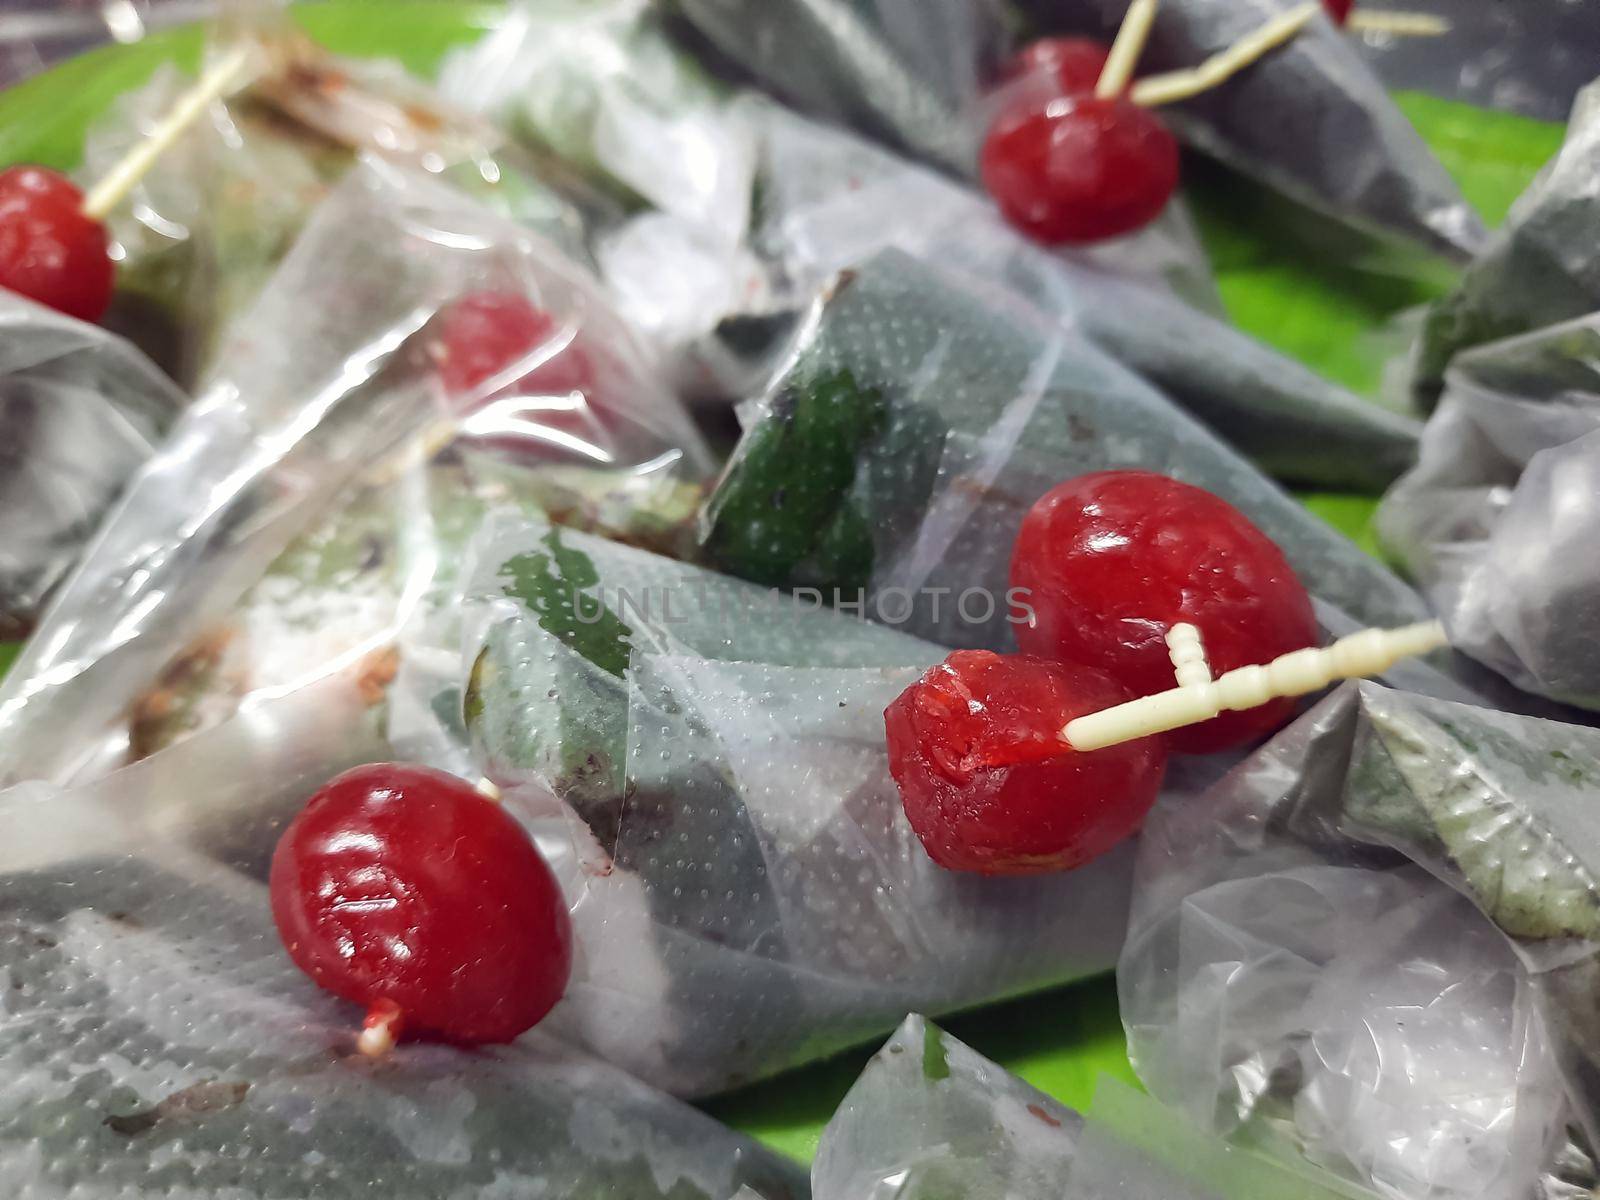 sweet paan wrapped in betel leaf, often used as an after dinner digestive.